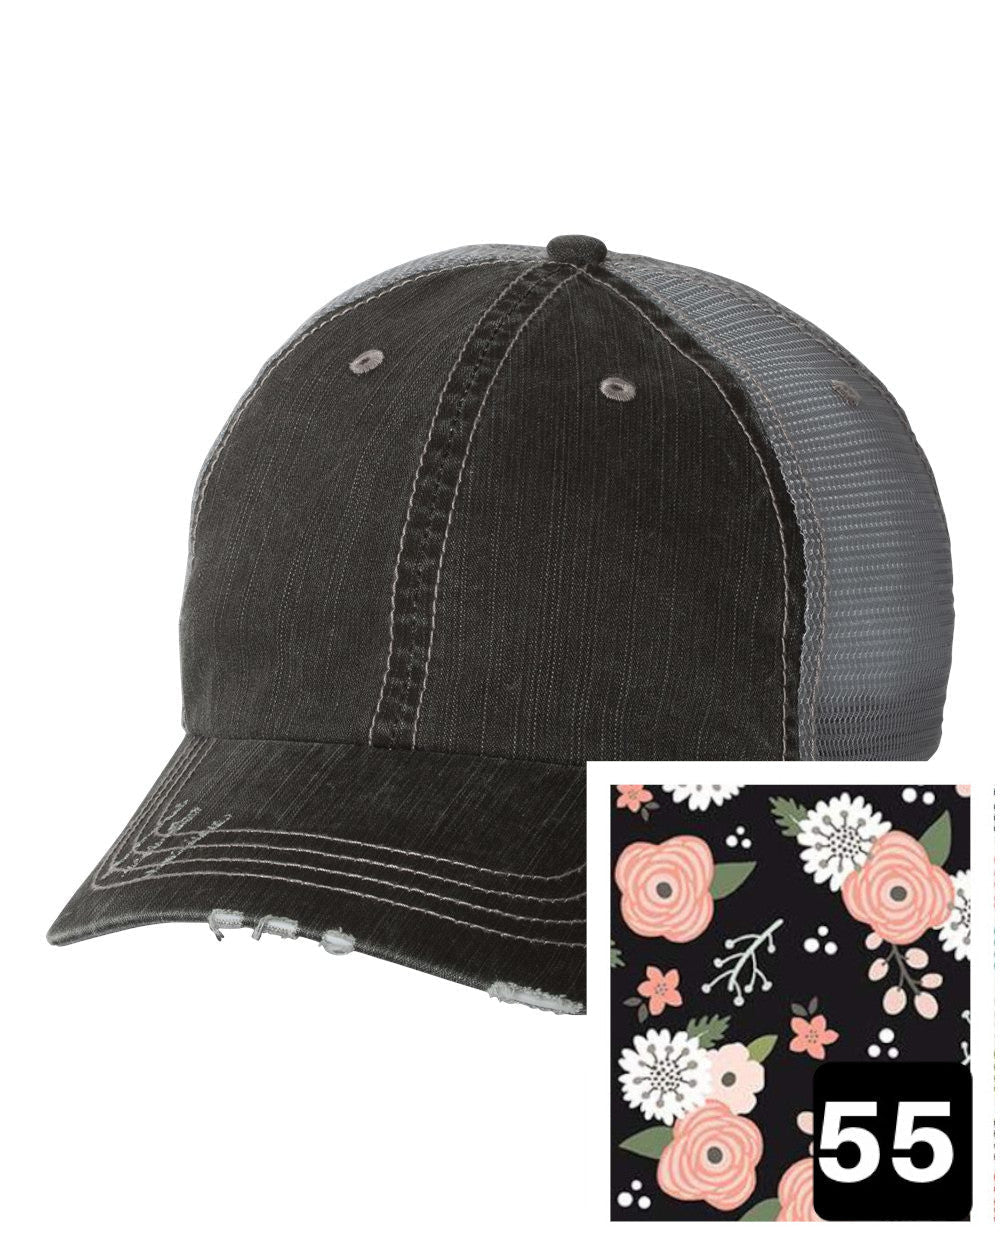 gray distressed trucker hat with petite floral on navy fabric state of Montana